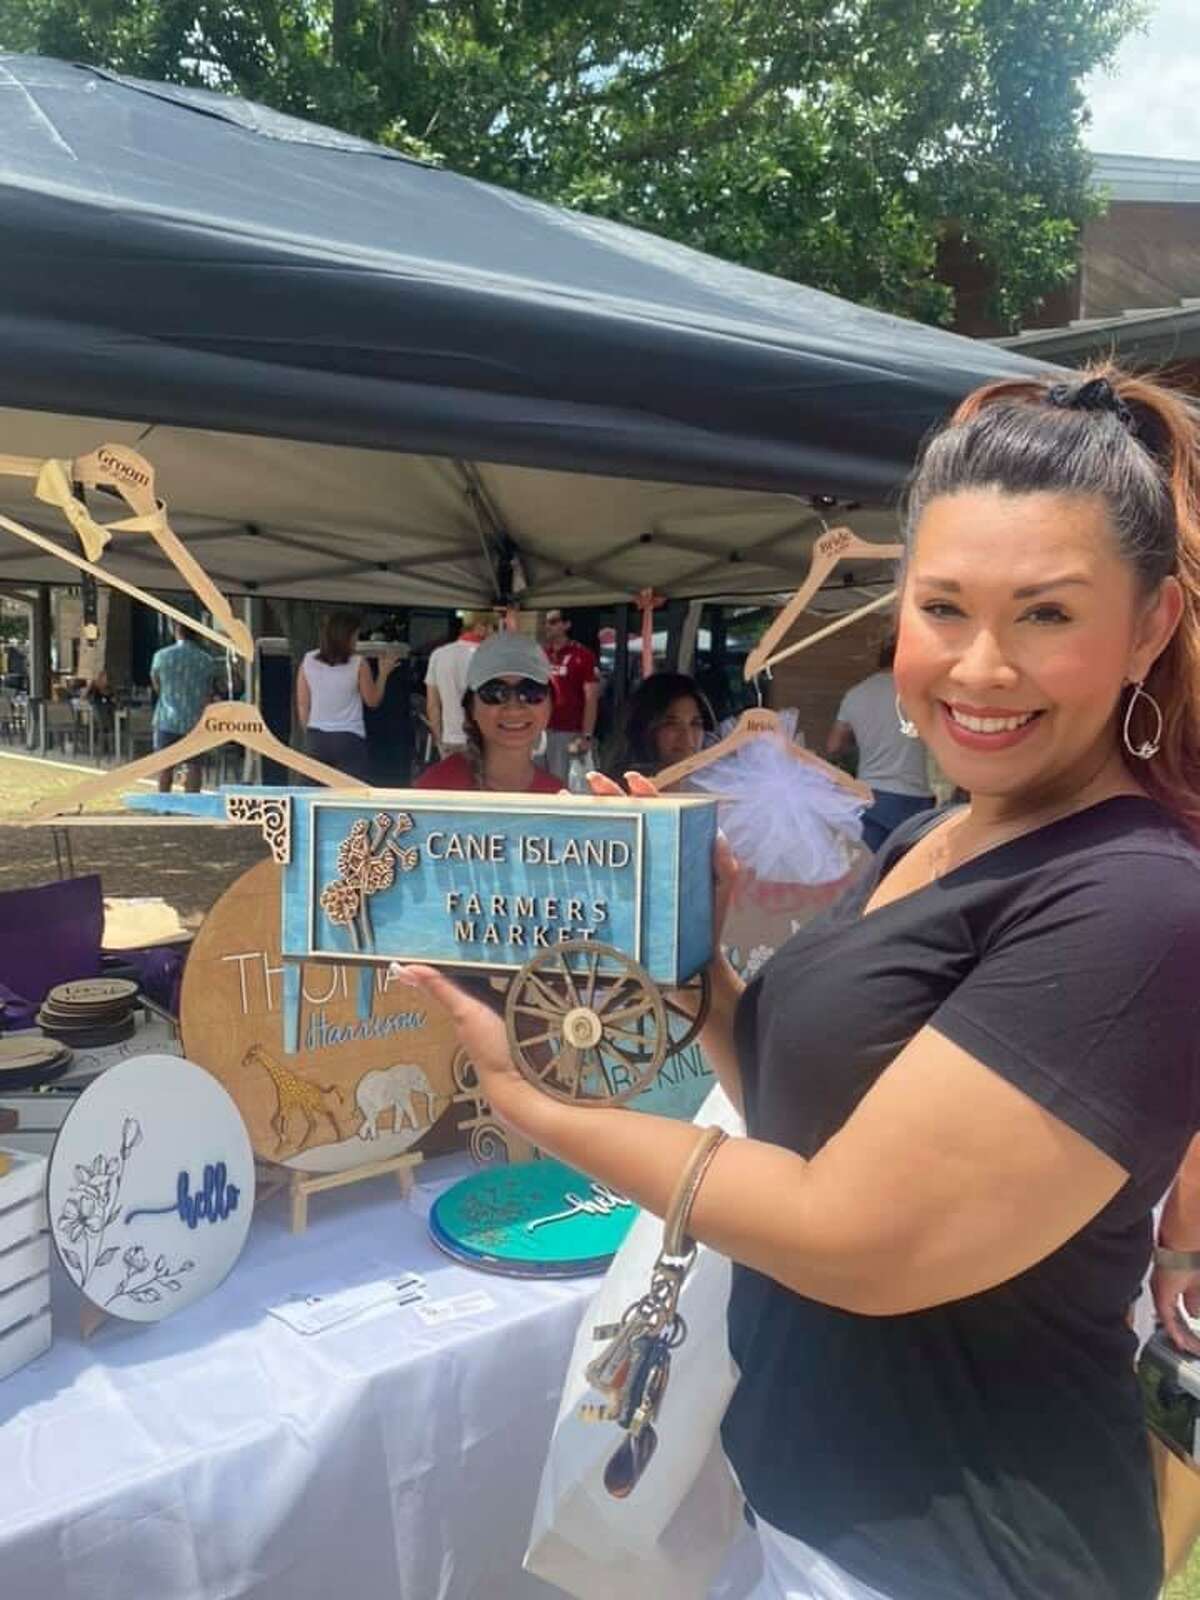 Cane Island’s Farmers Market, back by popular demand and now scheduled for the third Saturday of every month, returns Saturday, June 19 from 11 a.m. - 3 p.m. in the community’s Cane Quarter amenity village, 2100 Cane Island Parkway.